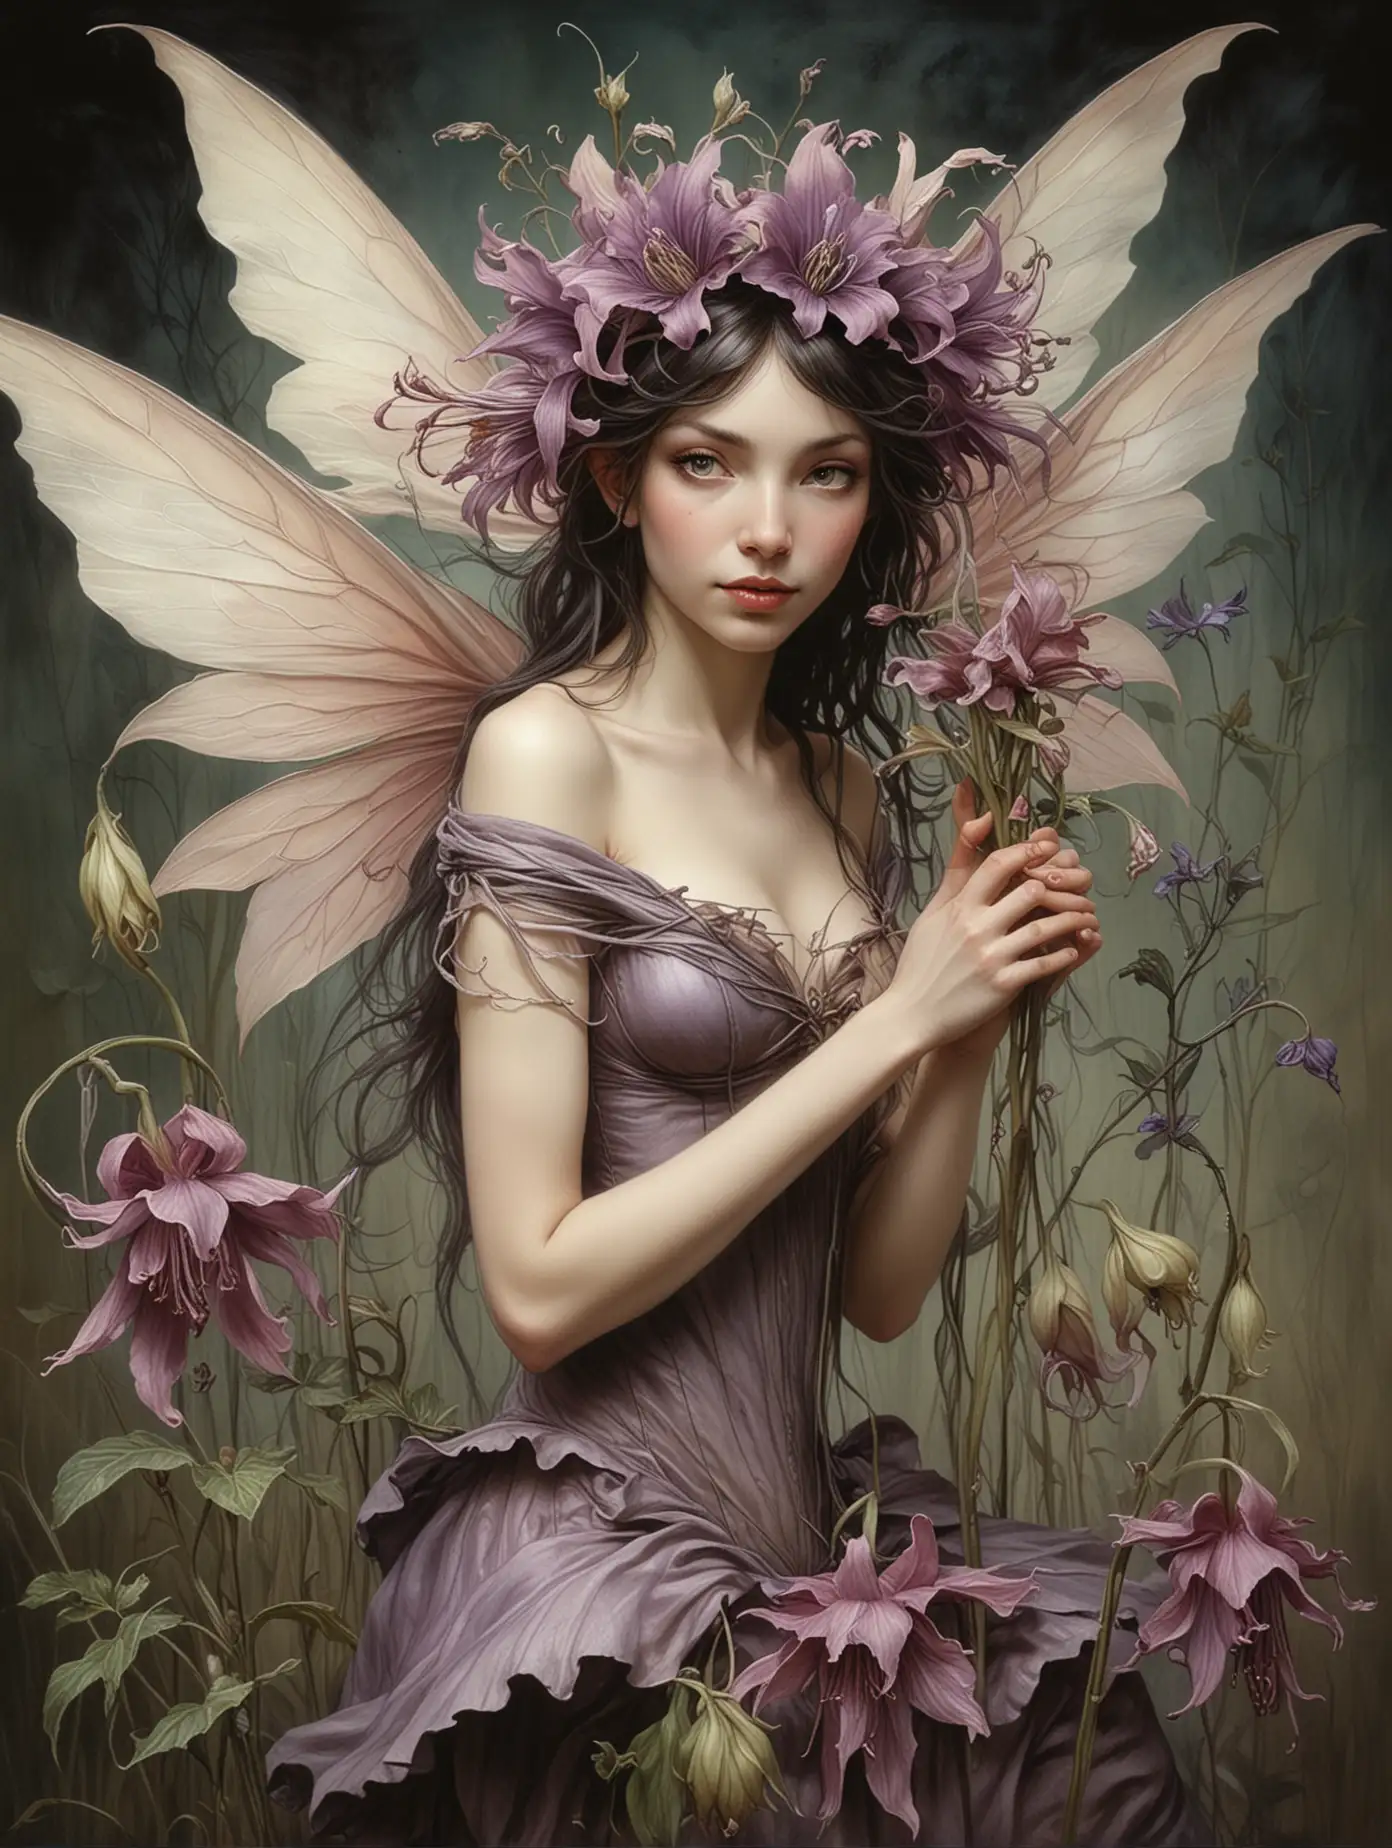 Cicely Mary Barker's art style blended with Brian Froud's art style creating a hyper-realistic, extremely detailed image of the Flower Fairy, Belladonna.